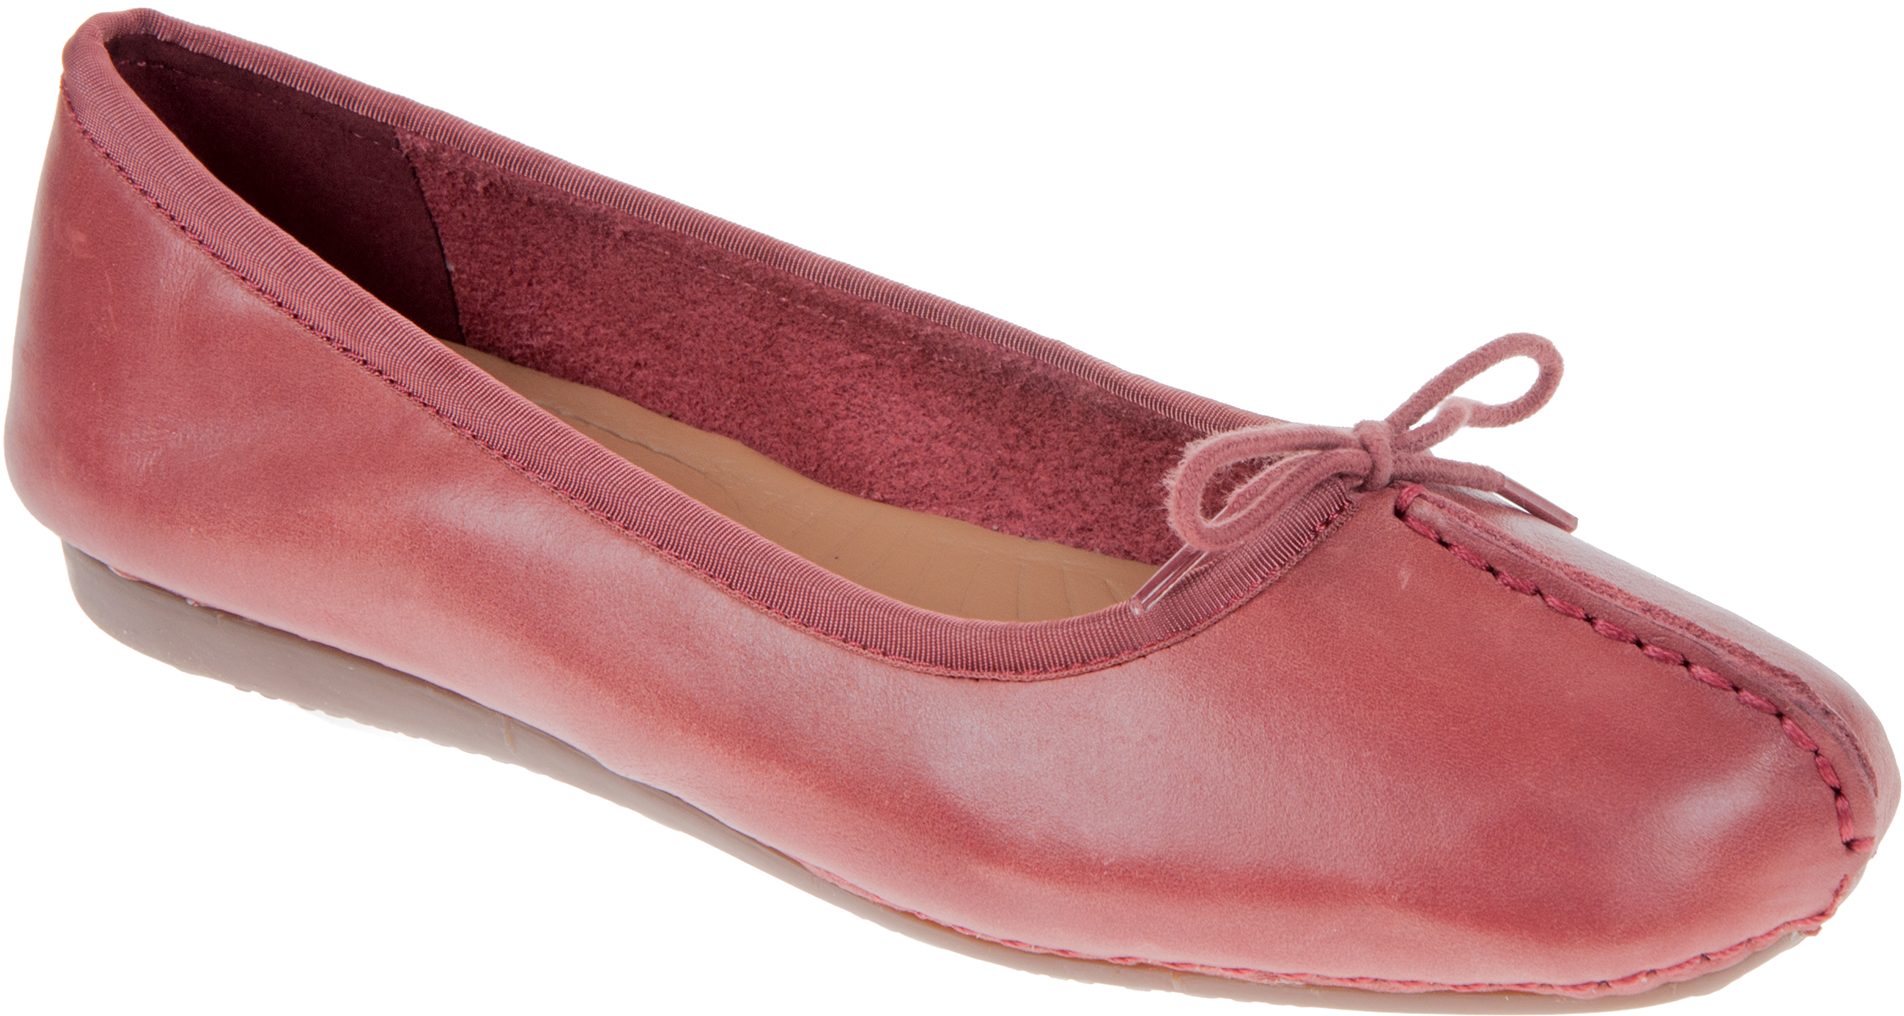 Clarks Freckle Ice Brick 26132117 - Ballerina Shoes - Humphries Shoes